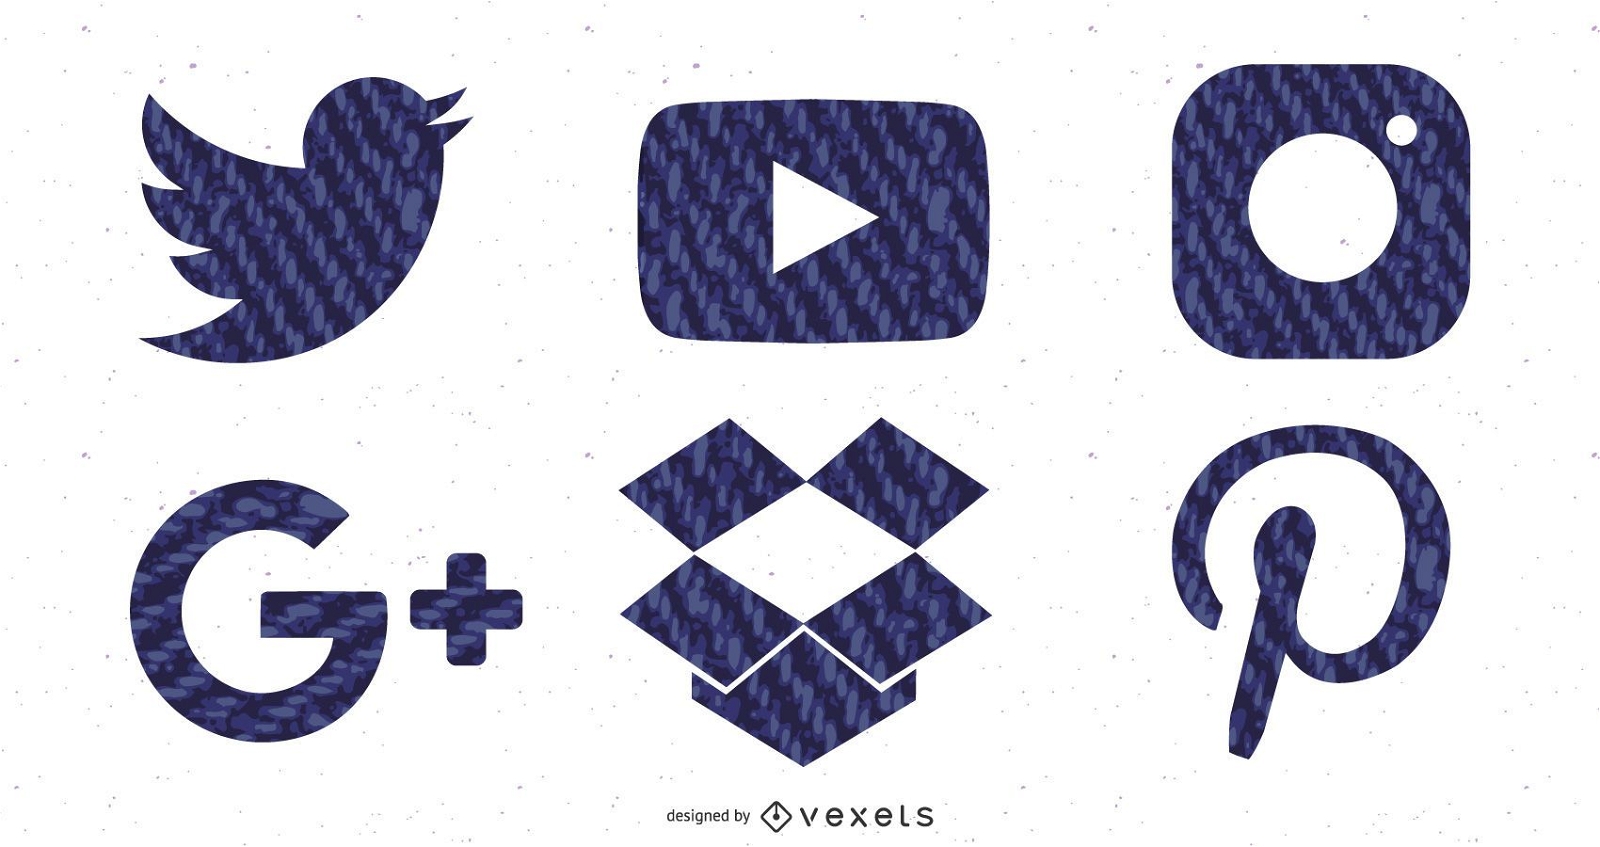 JEANS SOCIAL MEDIA ICON PACK